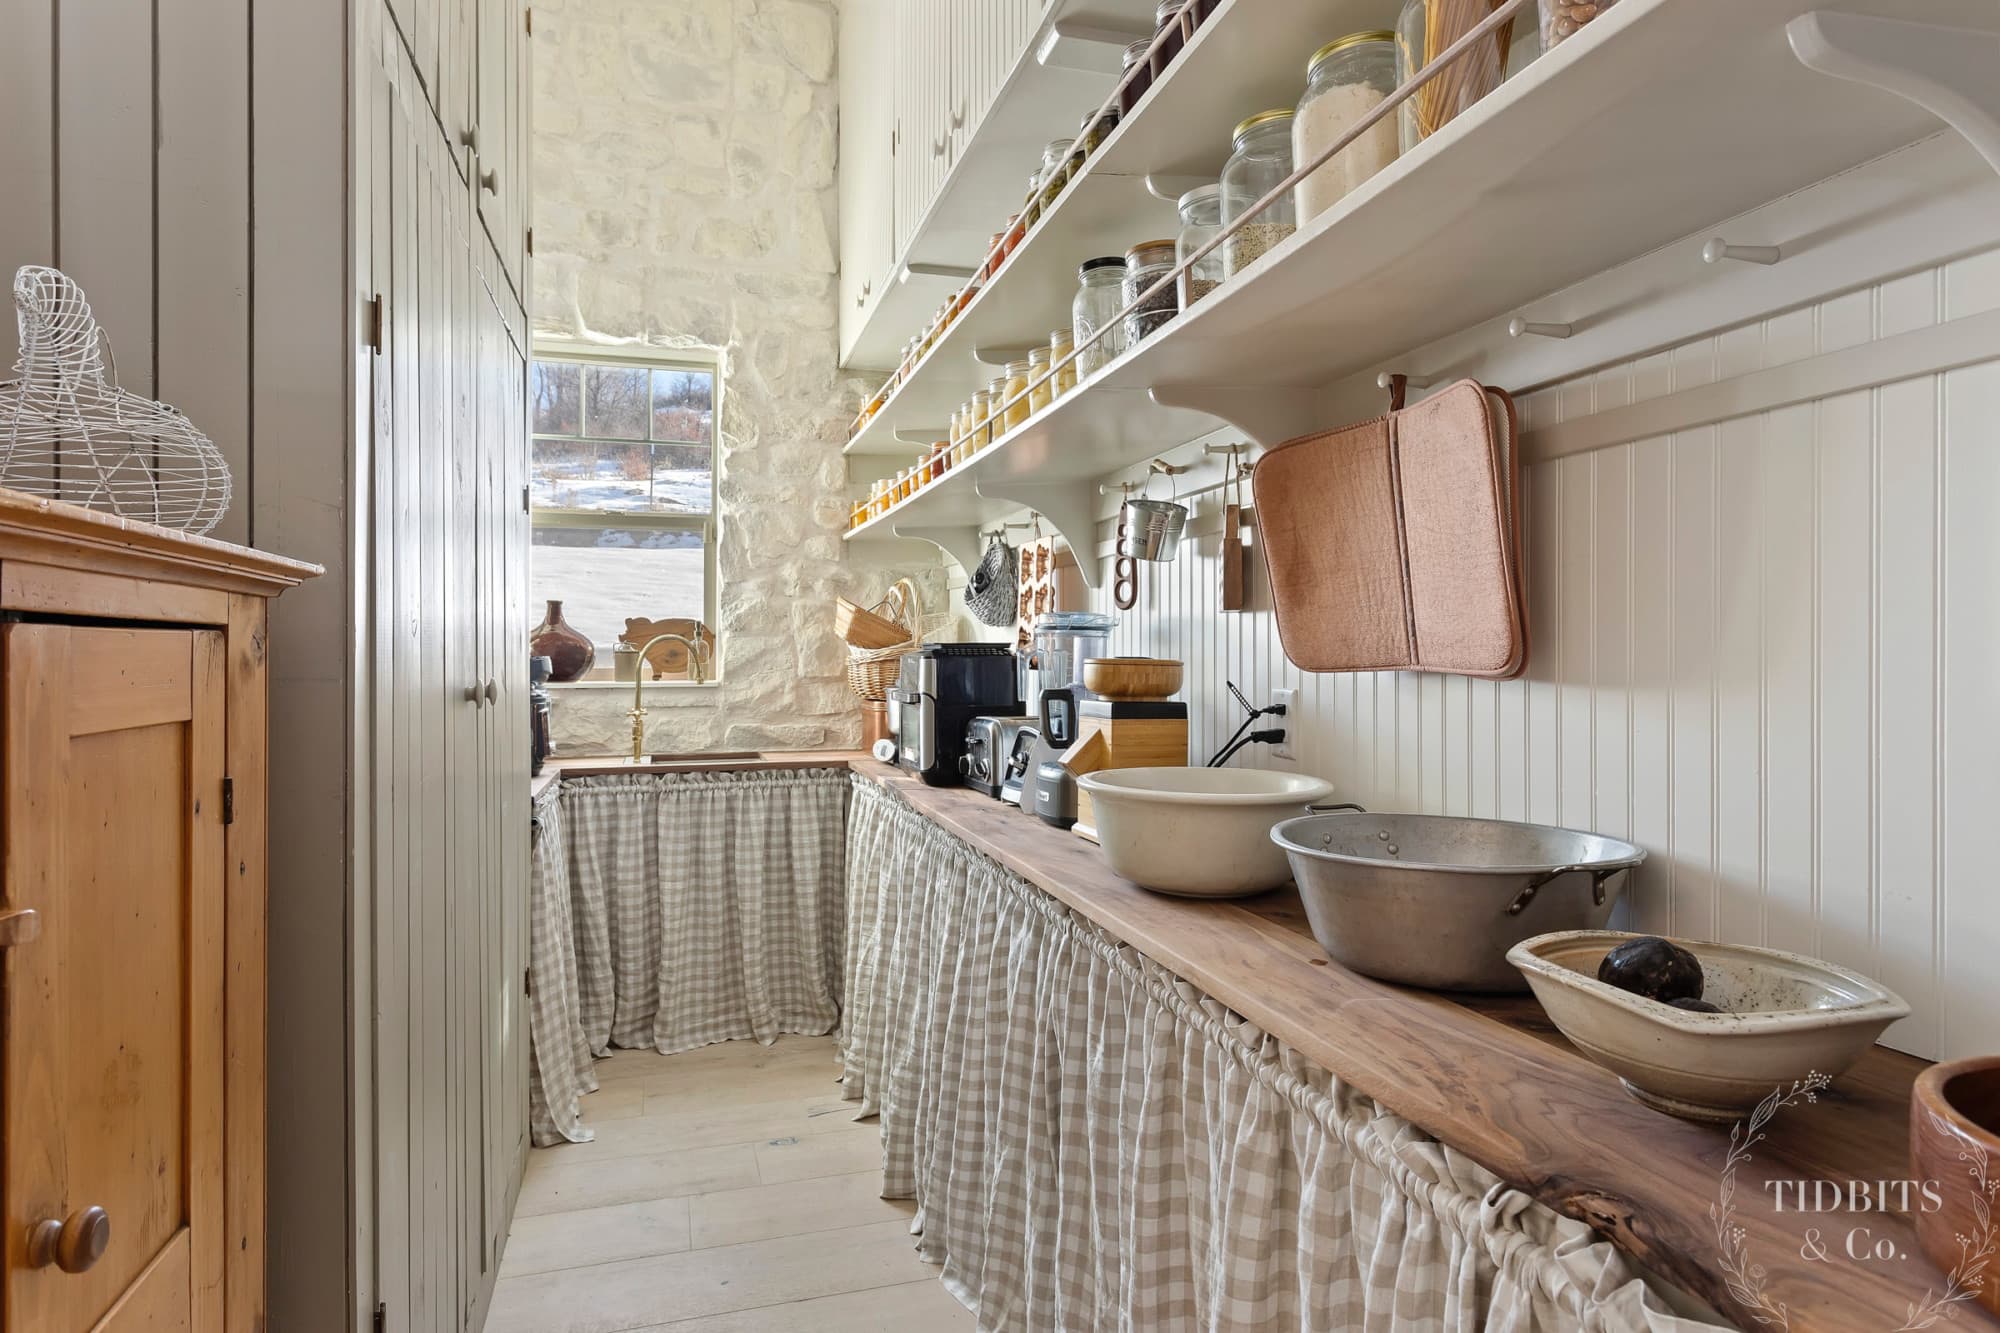 An interior stone wall in a butler's pantry